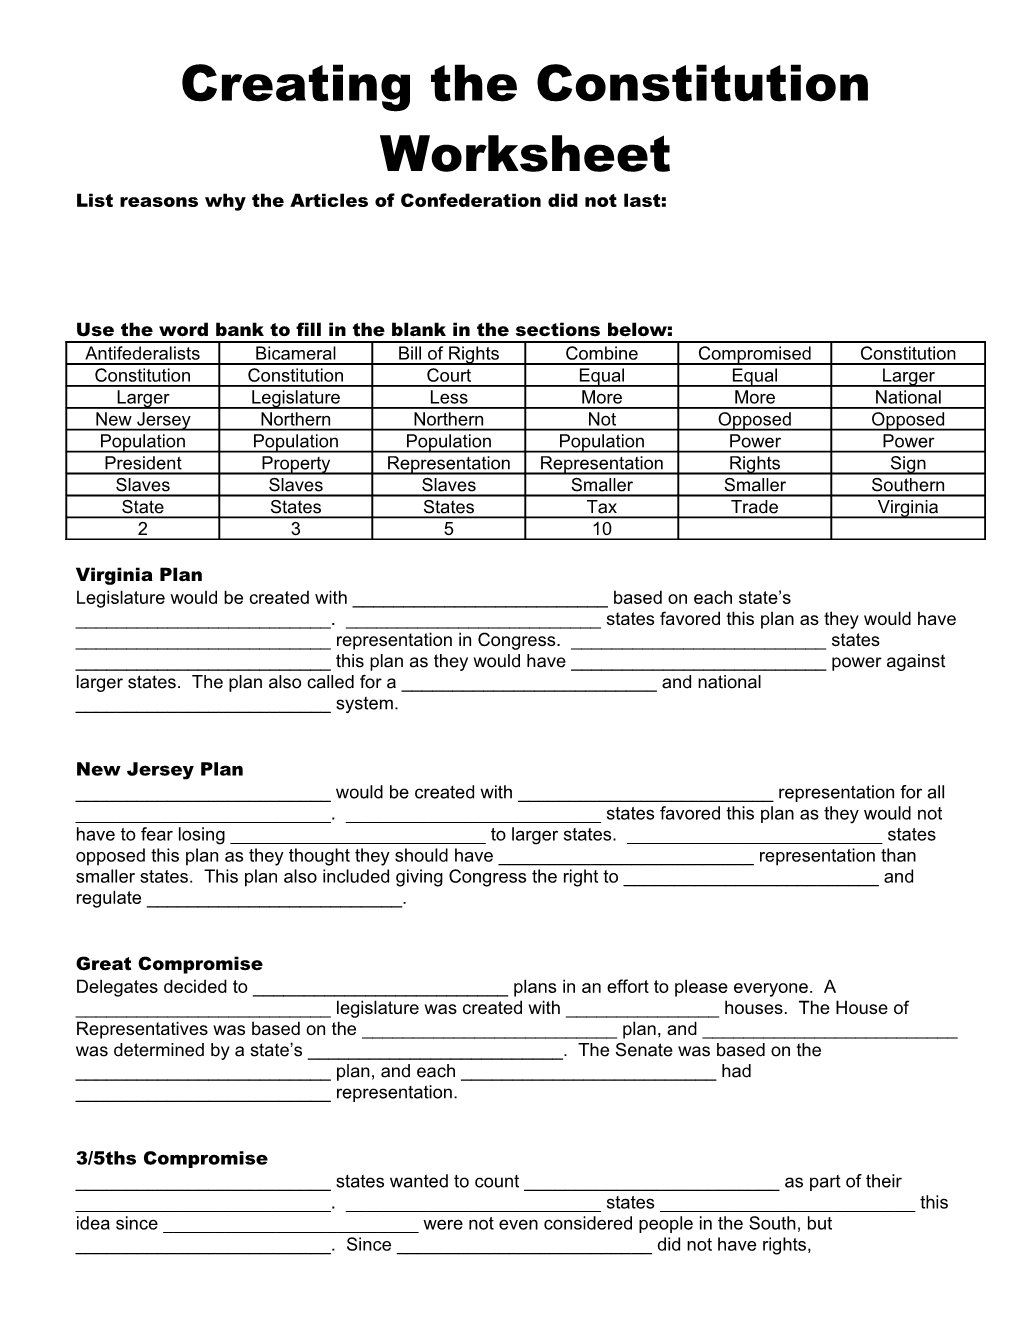 Creating the Constitution Worksheet s1